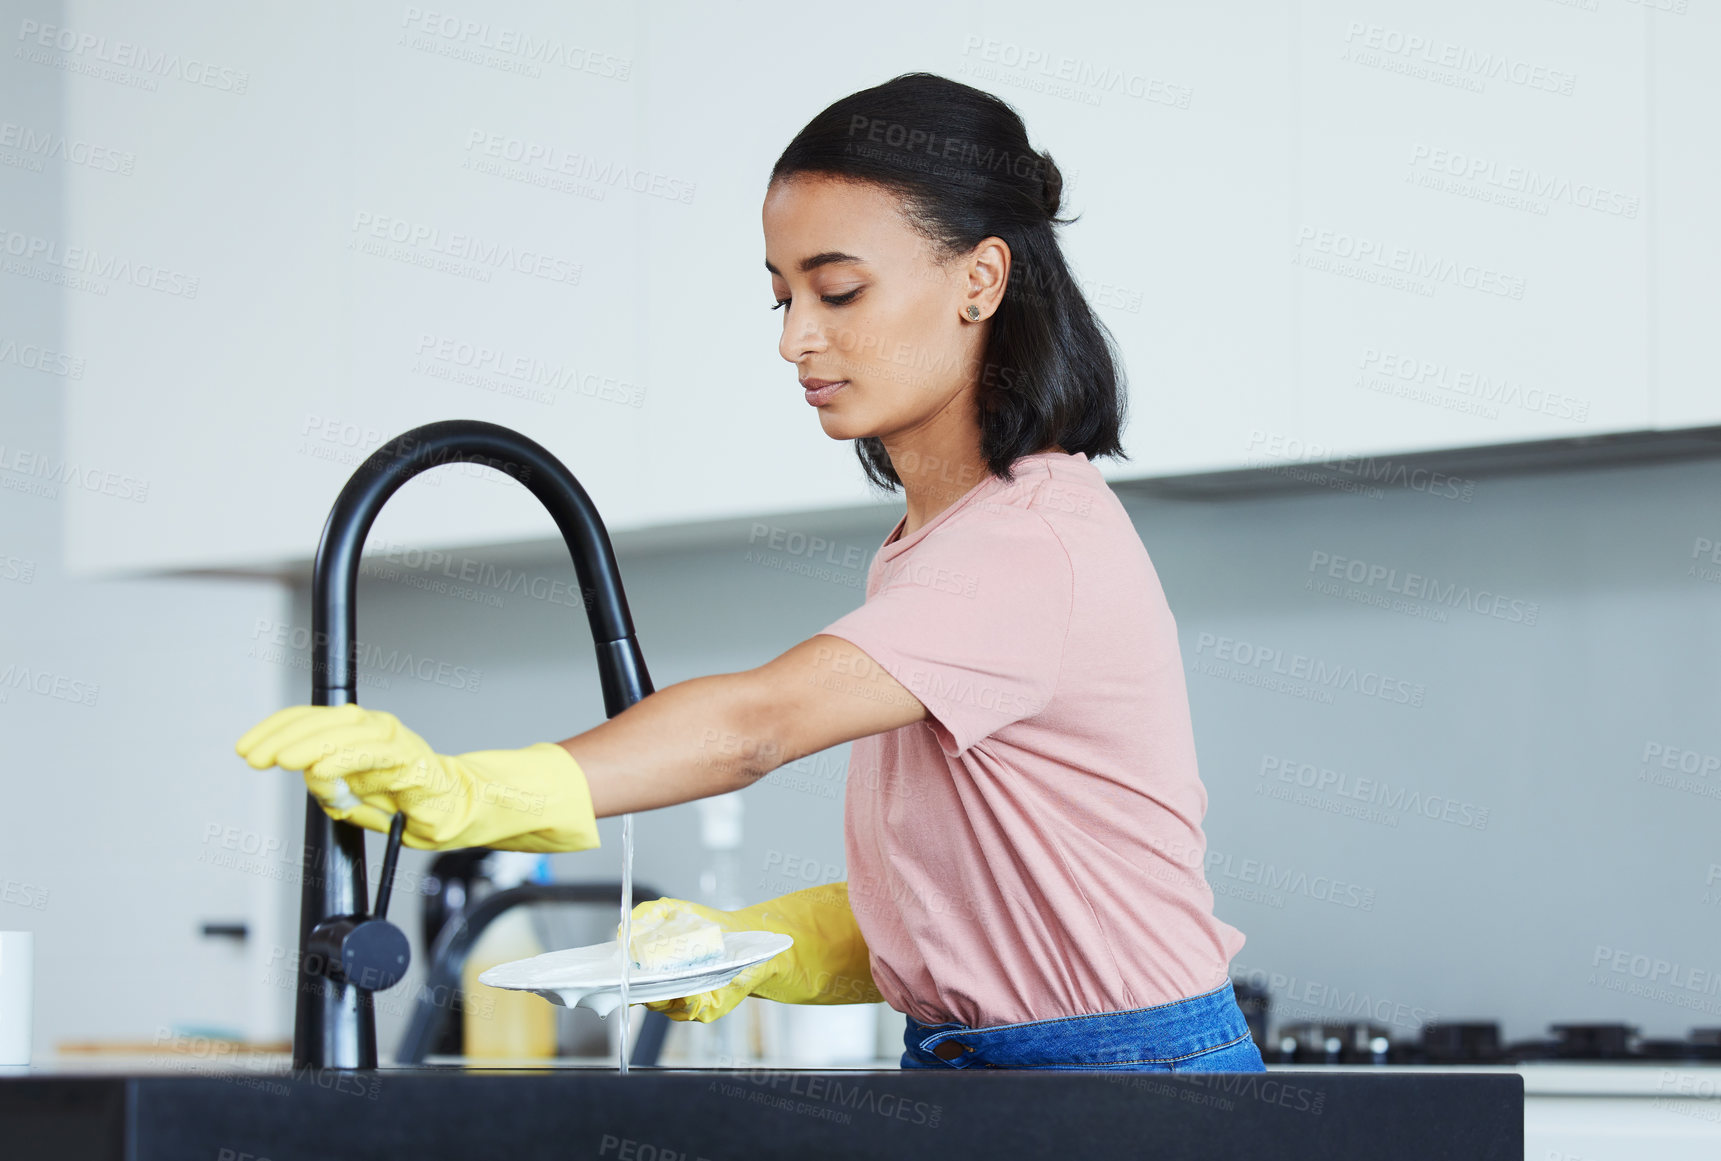 Buy stock photo Wash dishes, water and woman in kitchen with soap for dirt, cleaning service and remove bacteria. Female cleaner or worker, housework and hands with plate by sink for virus safety, health and sponge